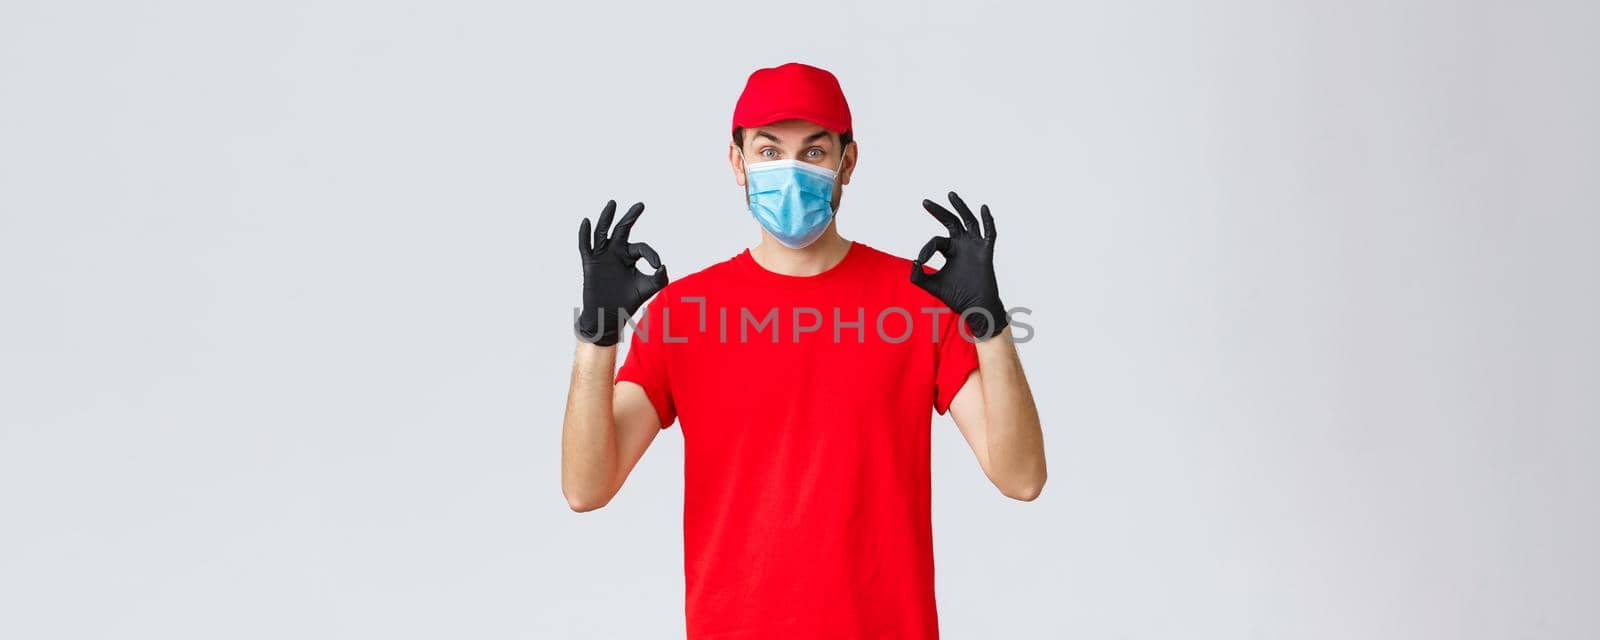 Covid-19, self-quarantine, online shopping and shipping concept. Excited delivery guy in red cap, t-shirt and face mask working coronavirus outbreak, show okay sign, guarantee safe courier service.